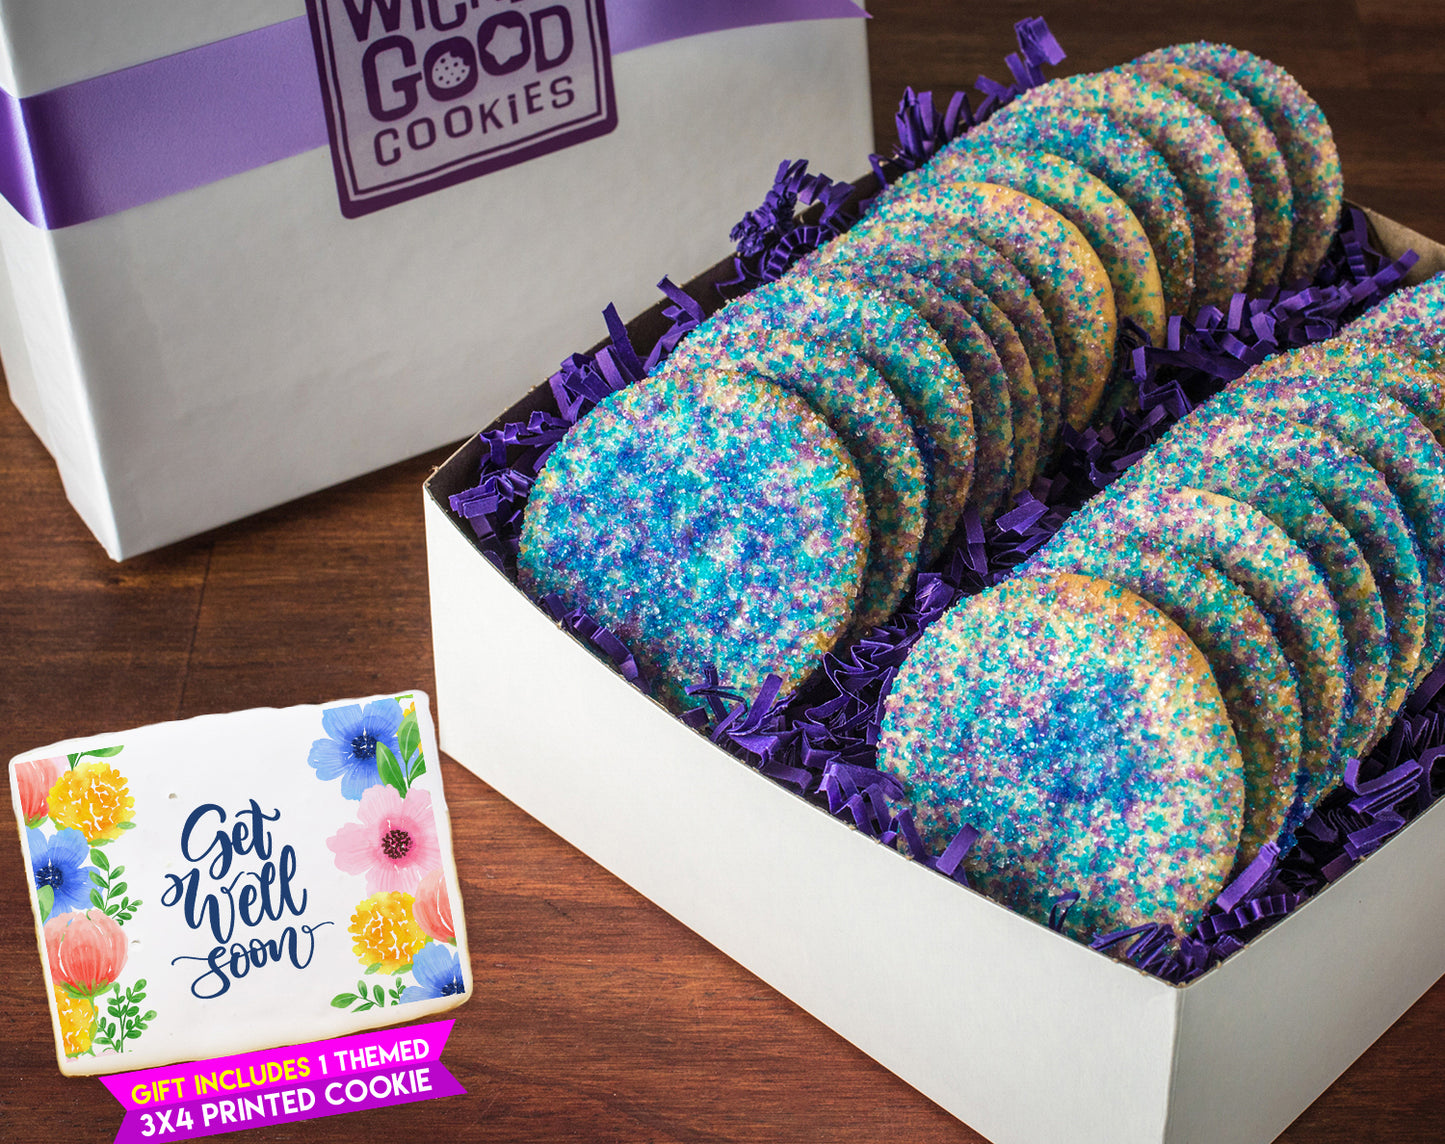 Feel Better Soon / Get Well Cookies - 6 or 12 Count – The Dainty Plum, LLC